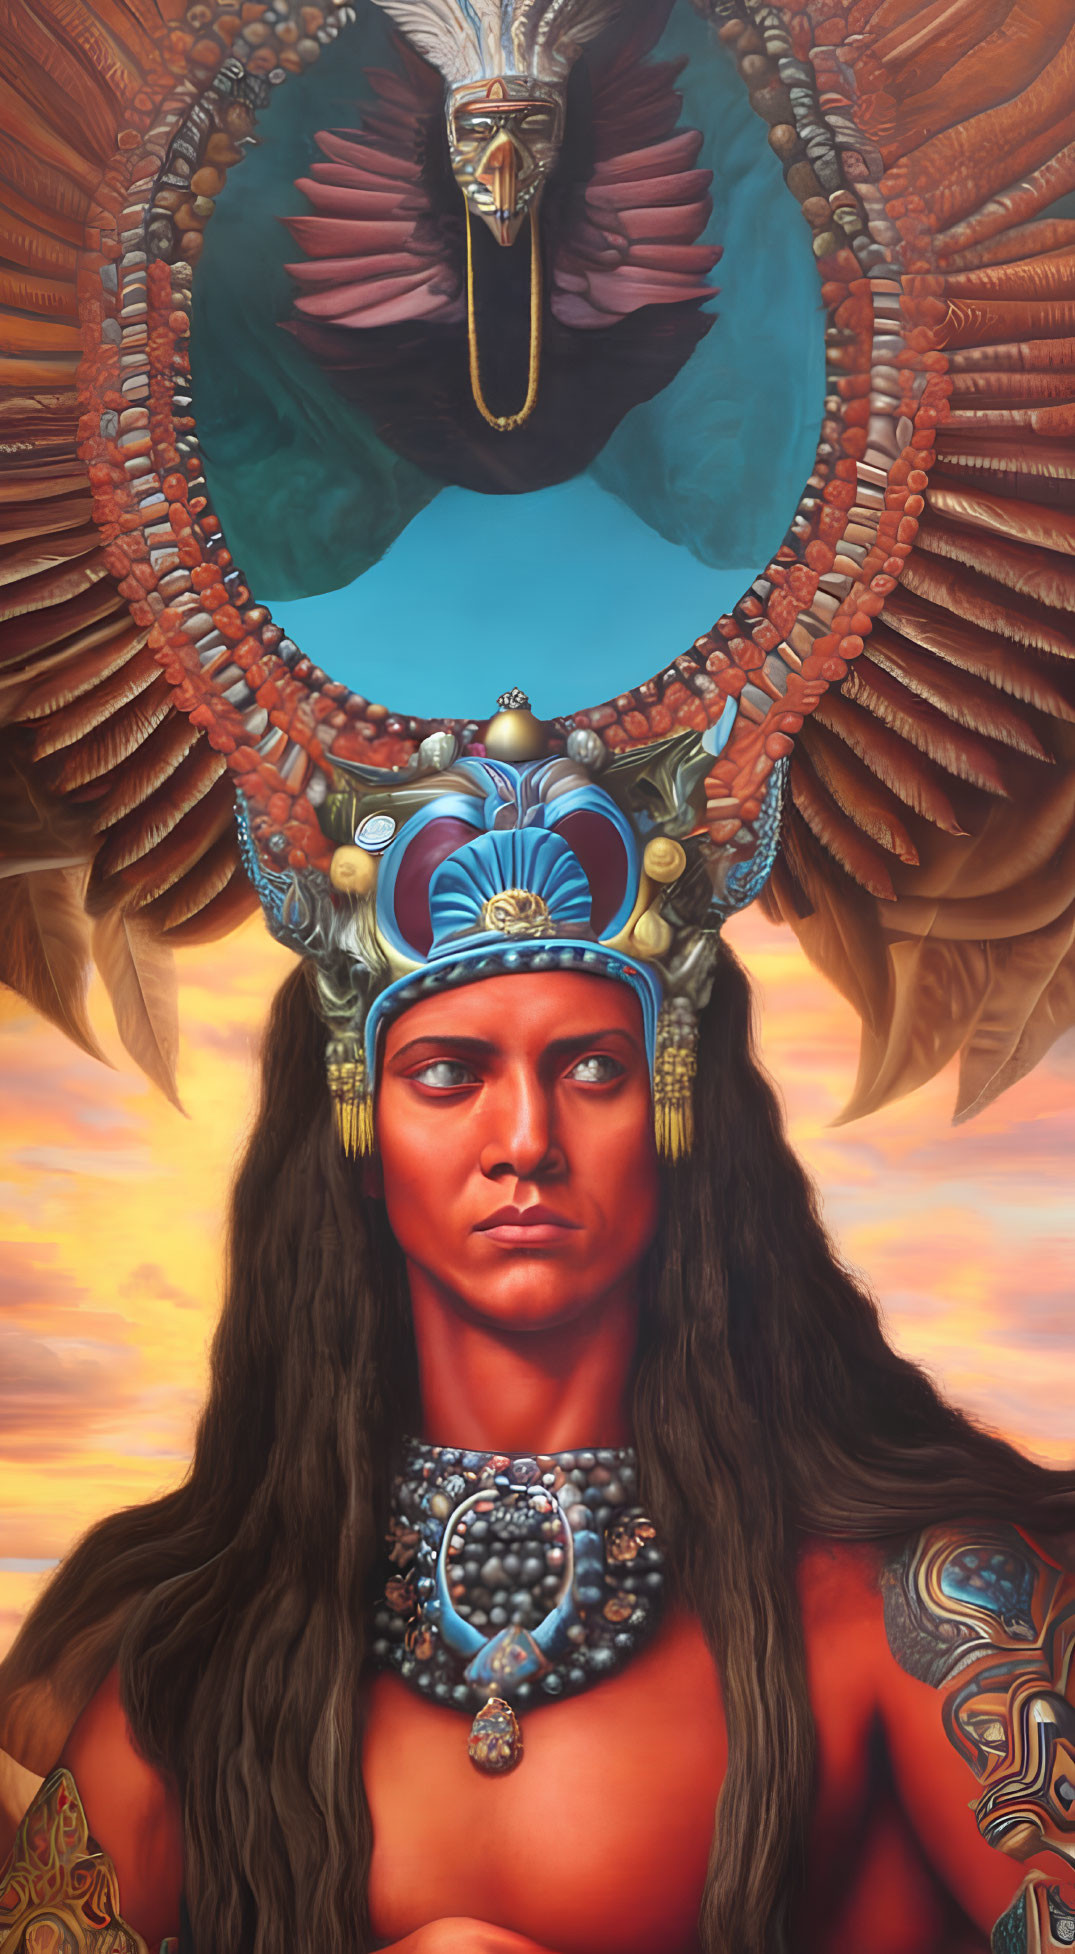 Detailed illustration of person with dark hair, blue face paint, feathered headdress, and jewelry against